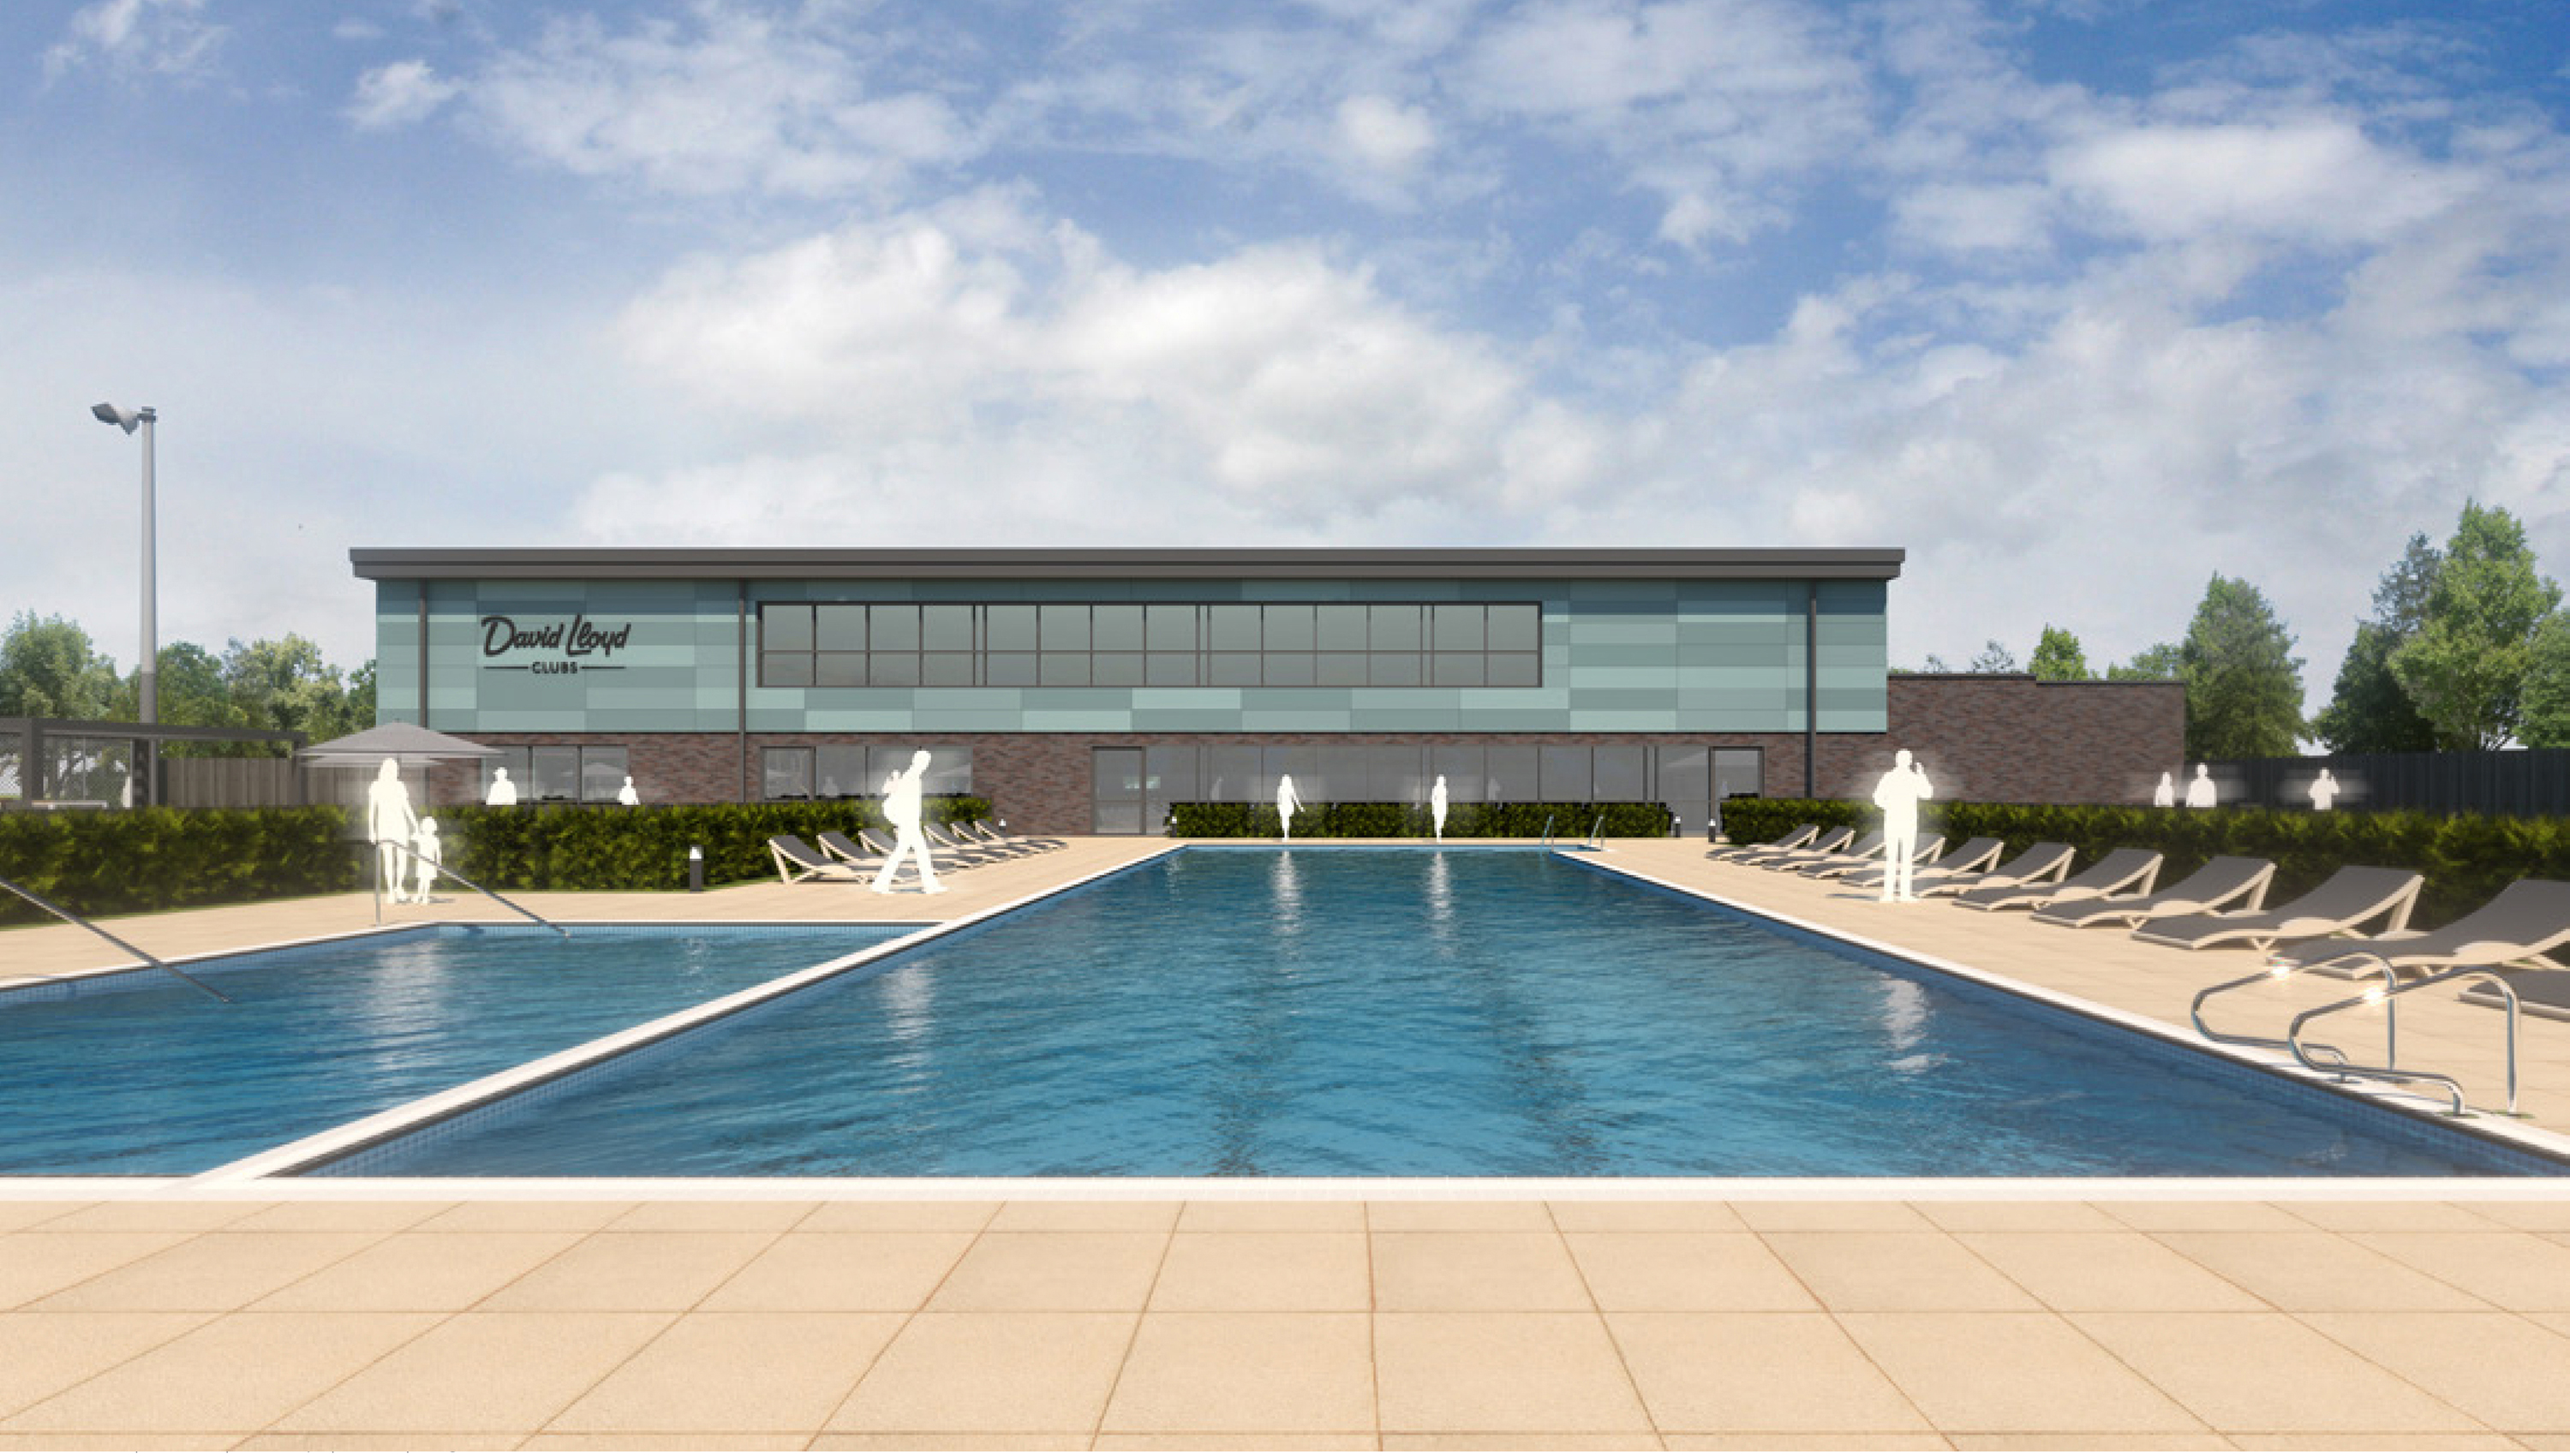 290,000 sq ft tech scheme with David Lloyd club approved - UK Property  Forums